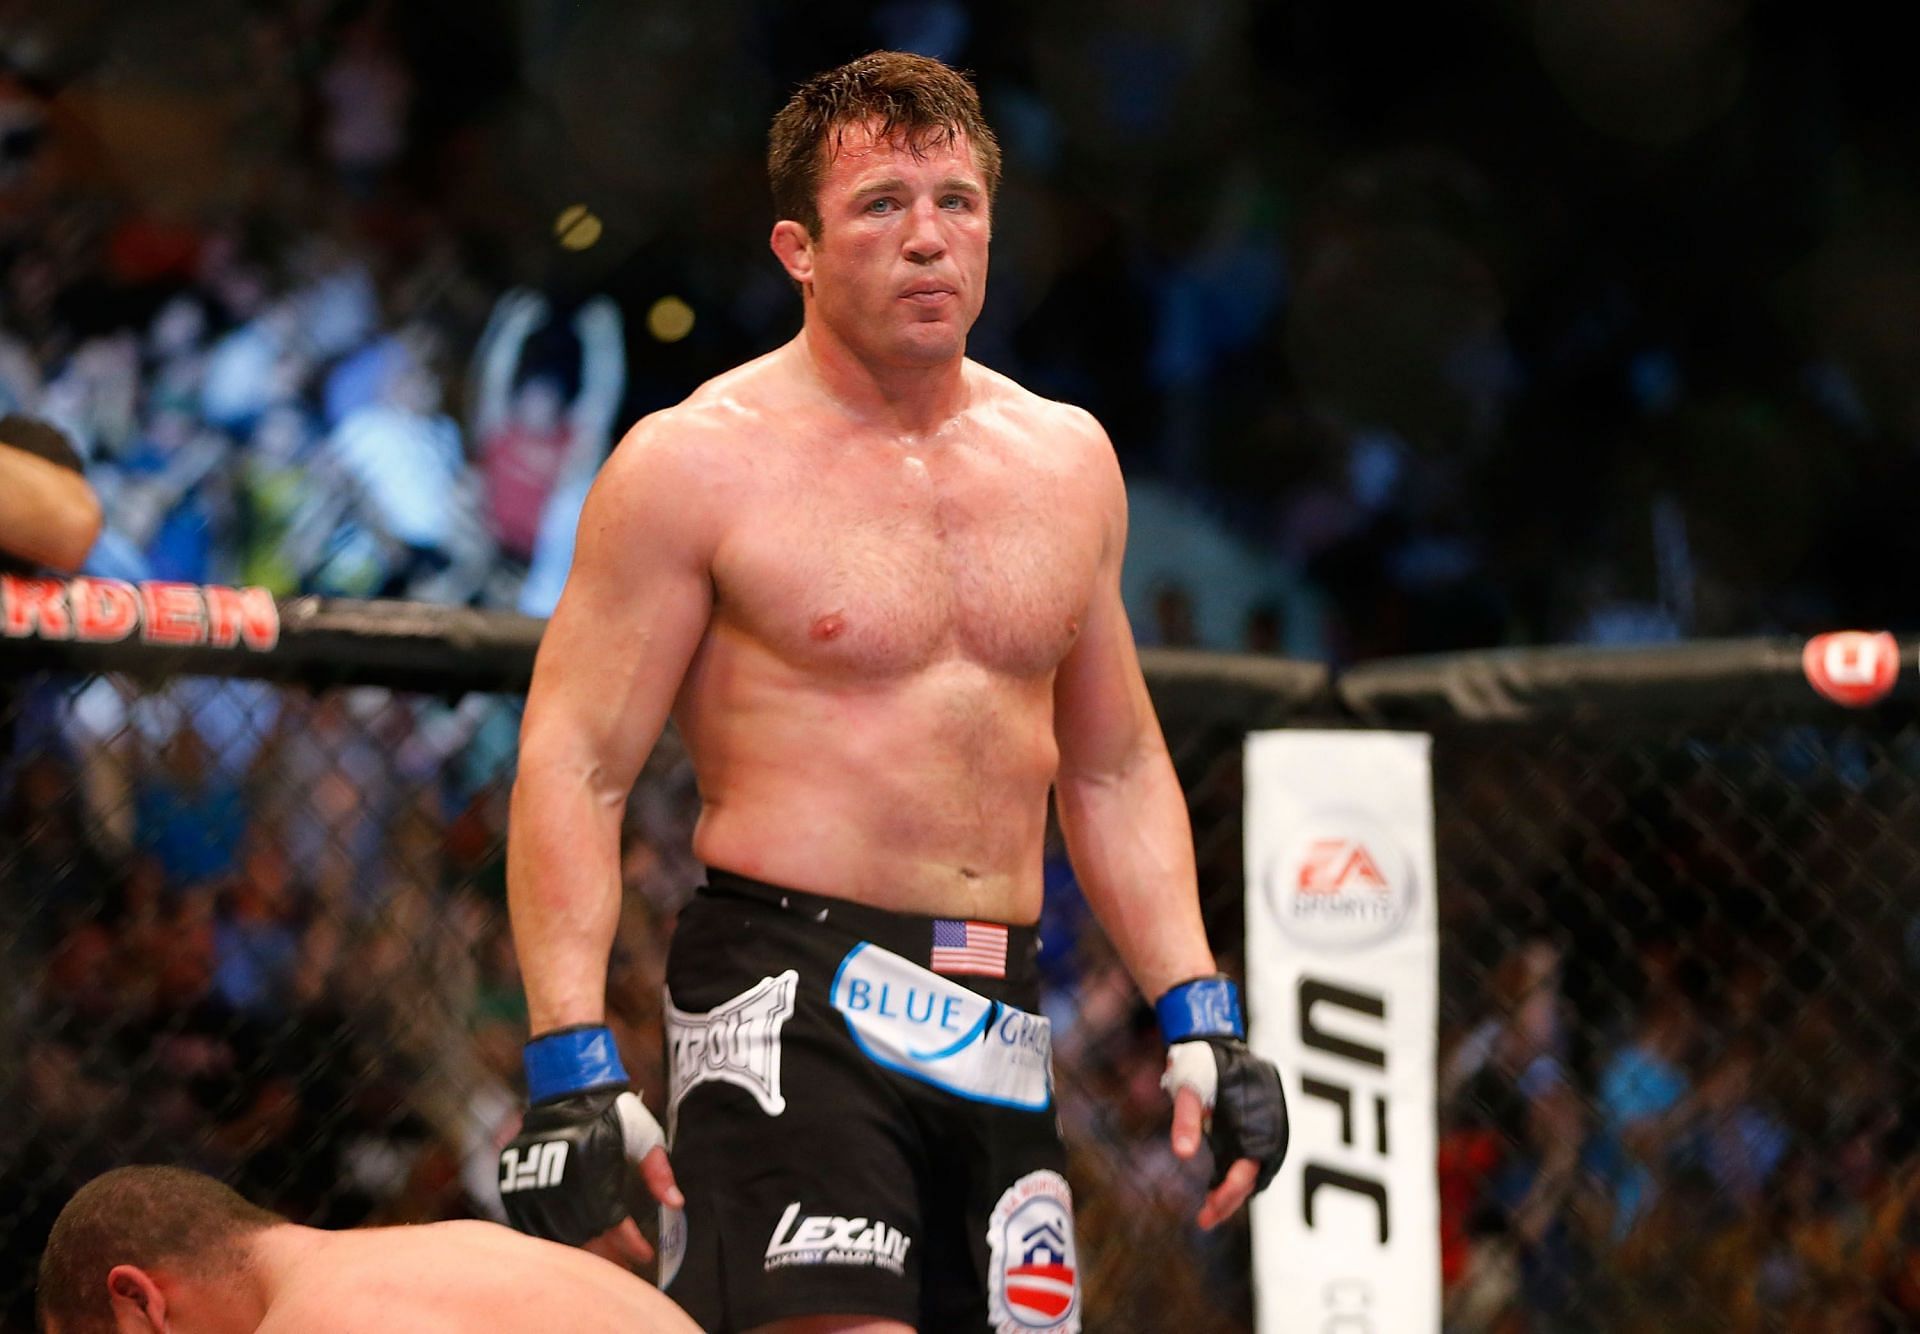 Chael Sonnen&#039;s skills on the microphone made up for his less than exciting fighting style